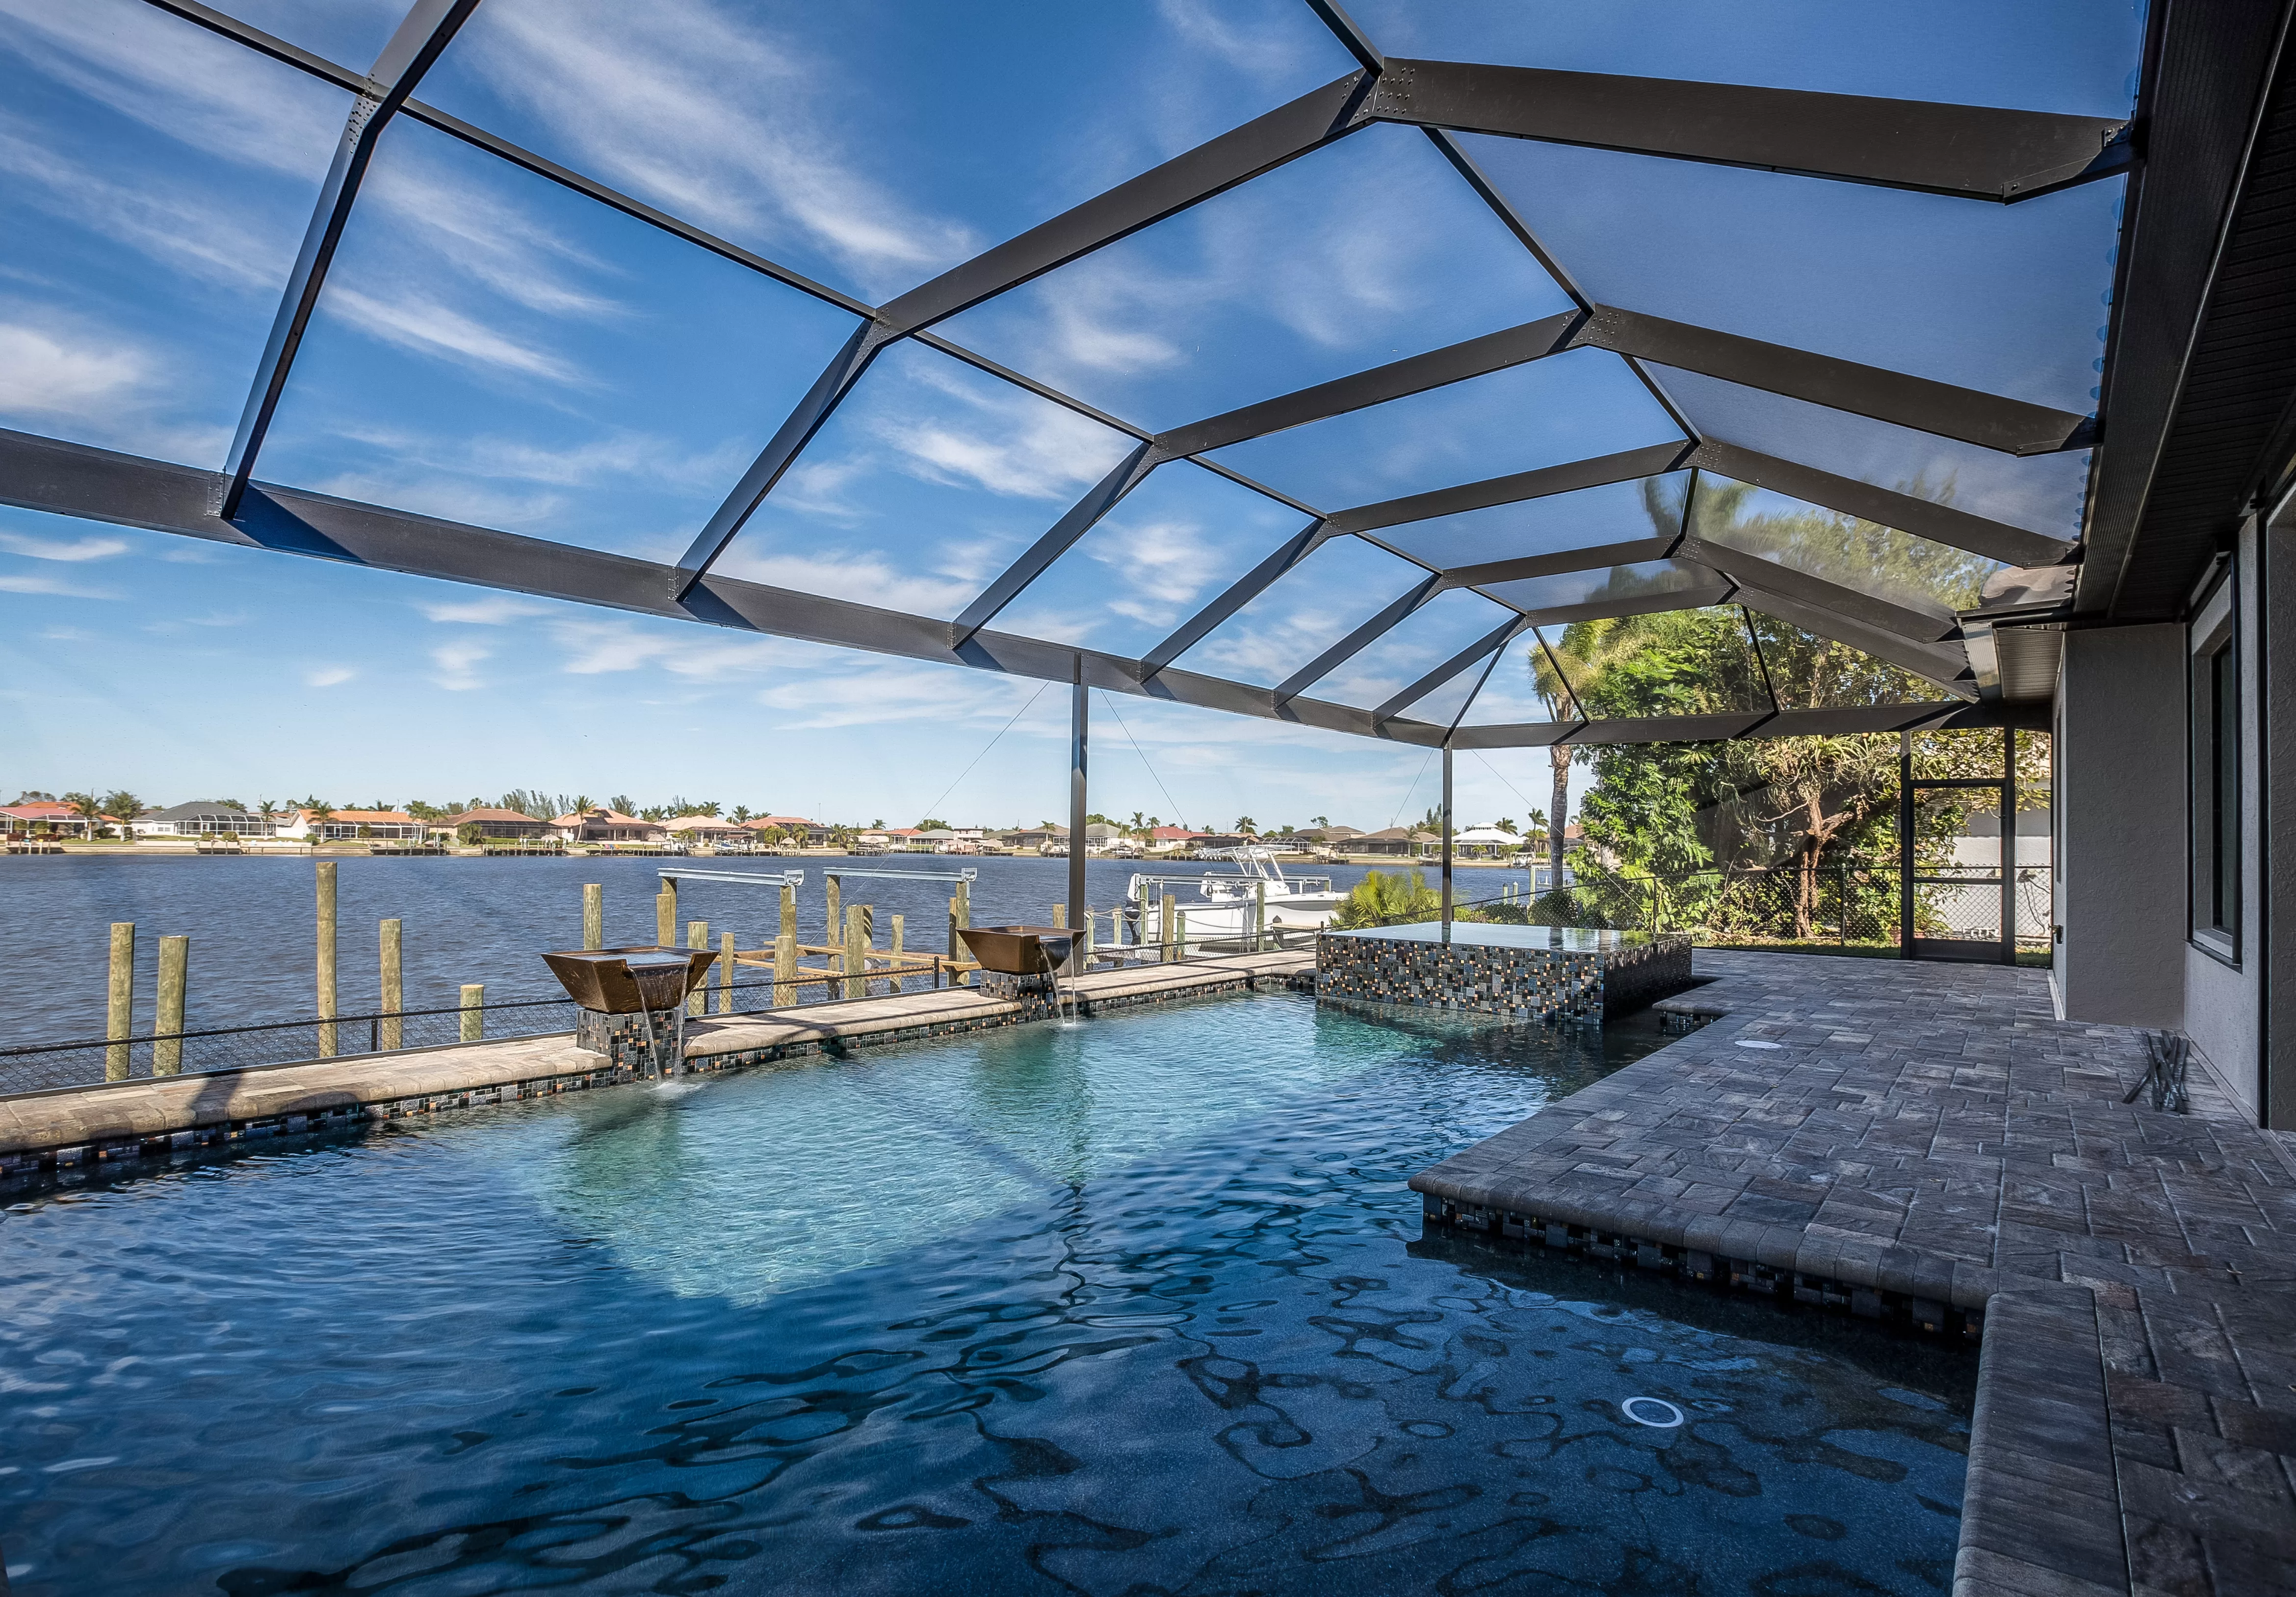 A beautiful swimming pool enclosure is situated right on the river for the idyllic viewpoint. 